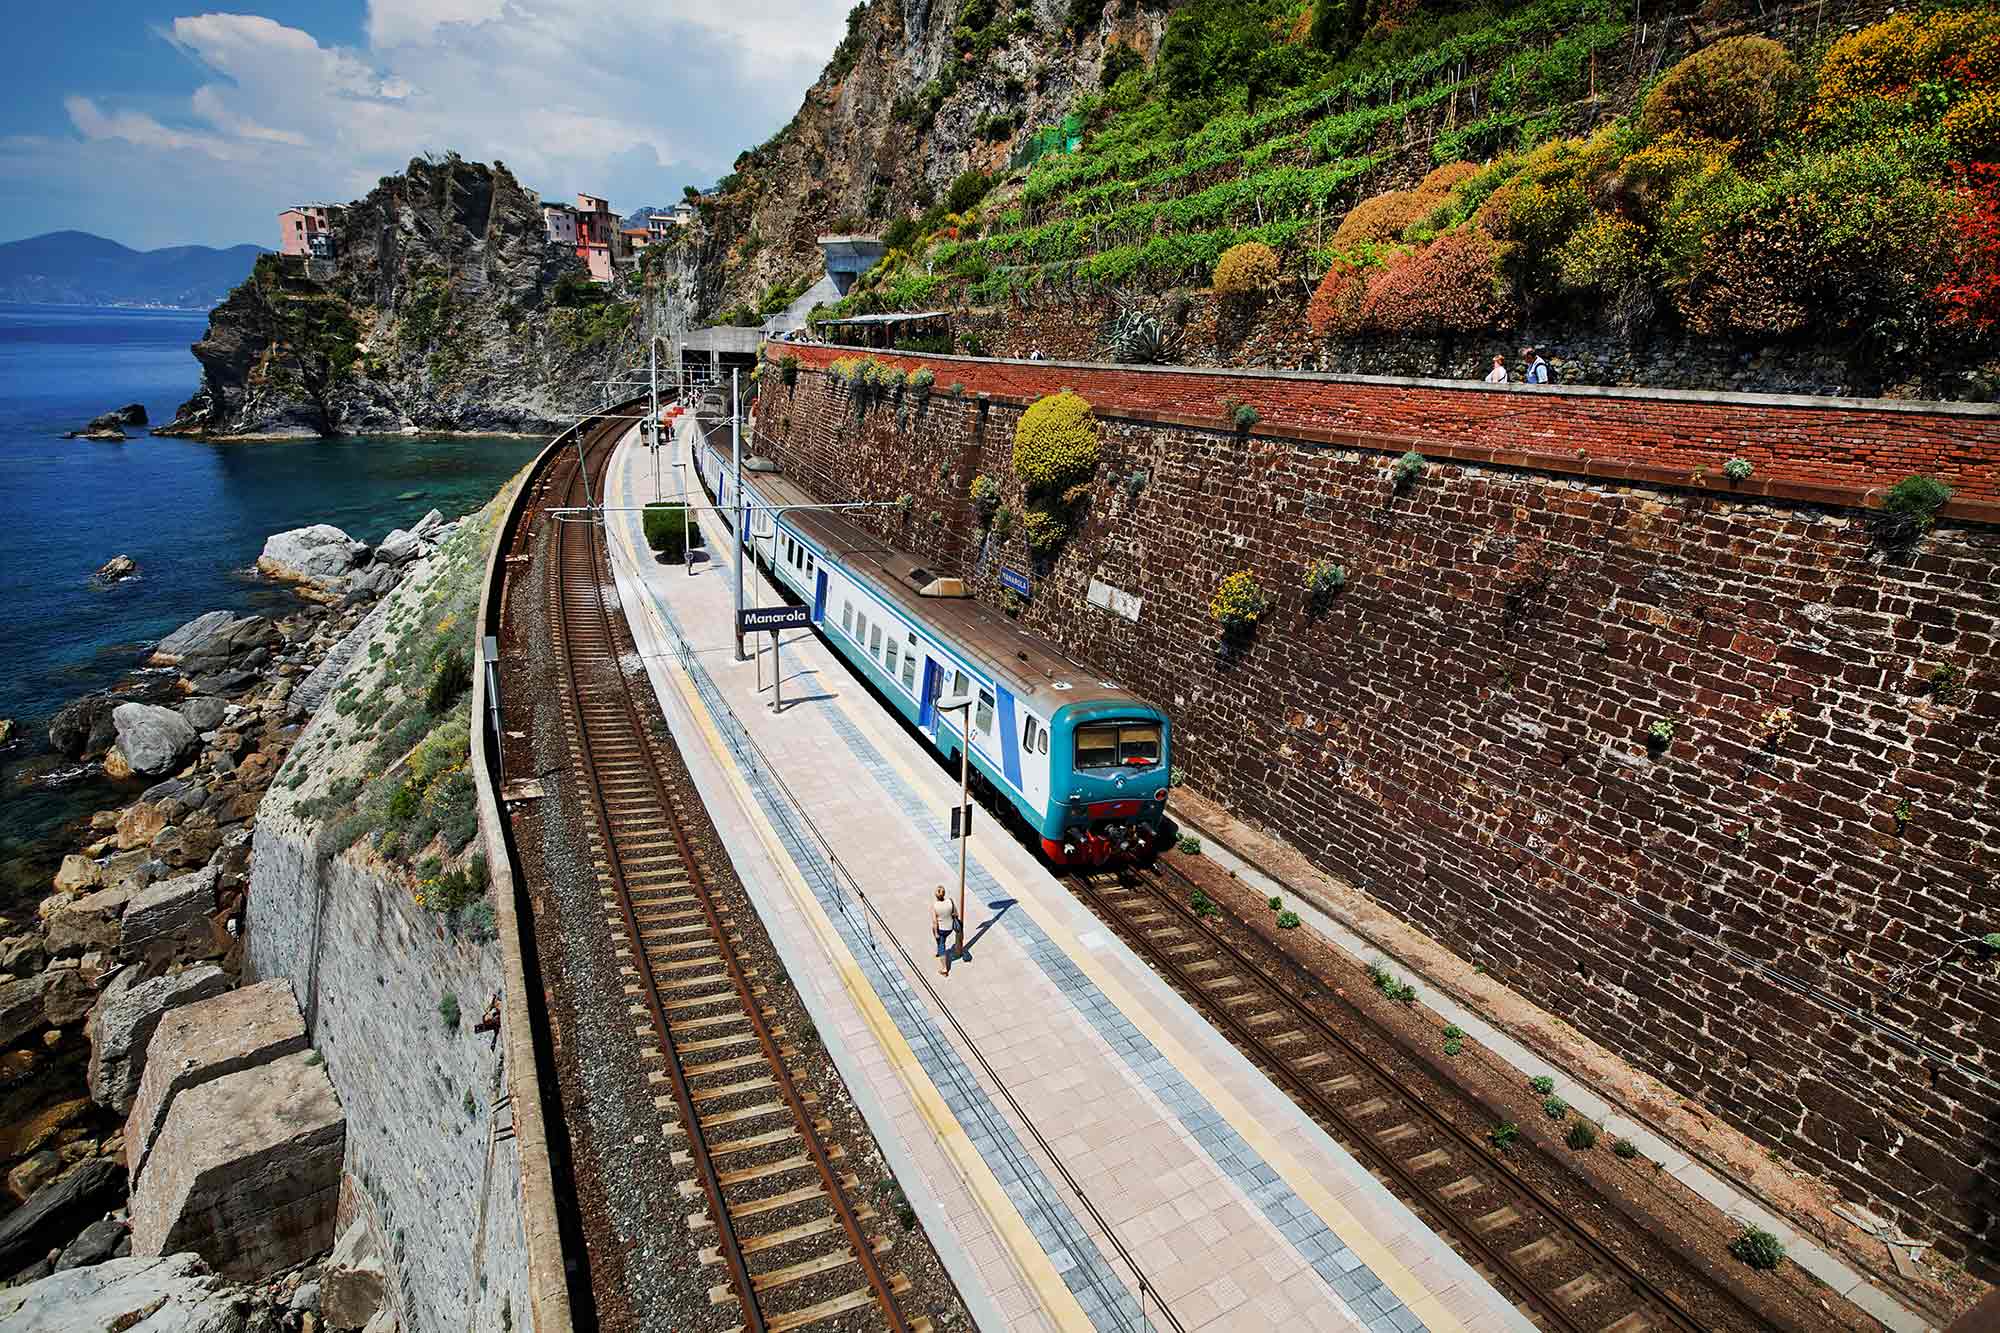 See Cinque Terre By Train: The Italian Riviera's Five Villages | Trainline